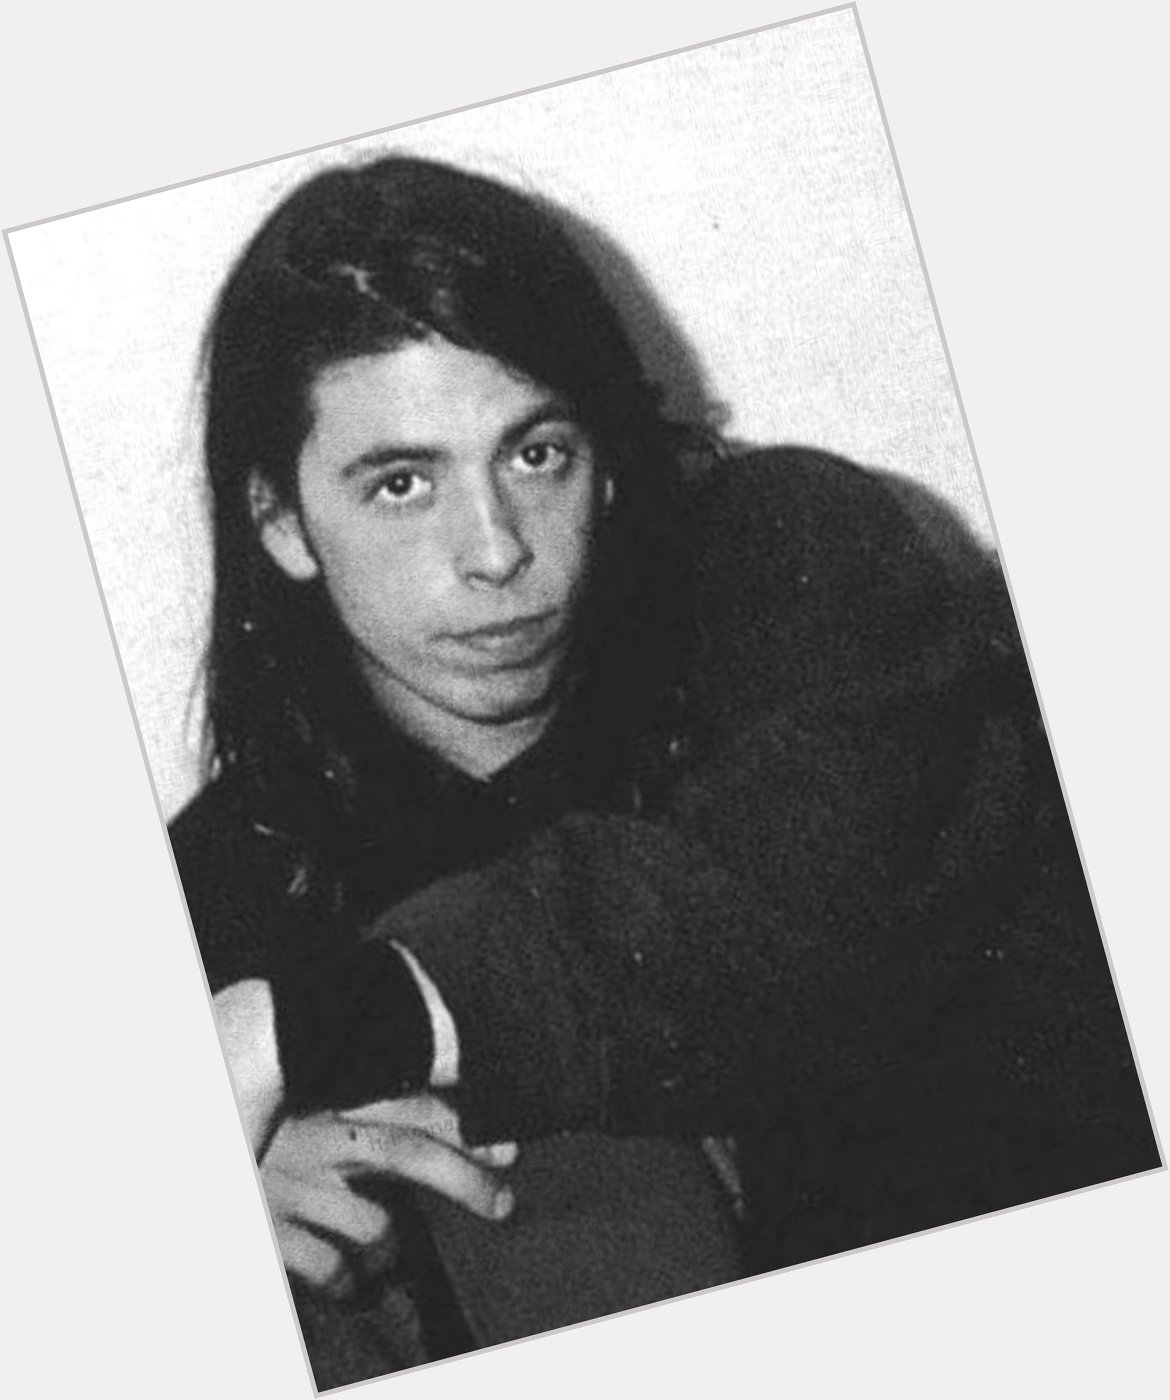 Happy birthday to a legend! David Grohl 